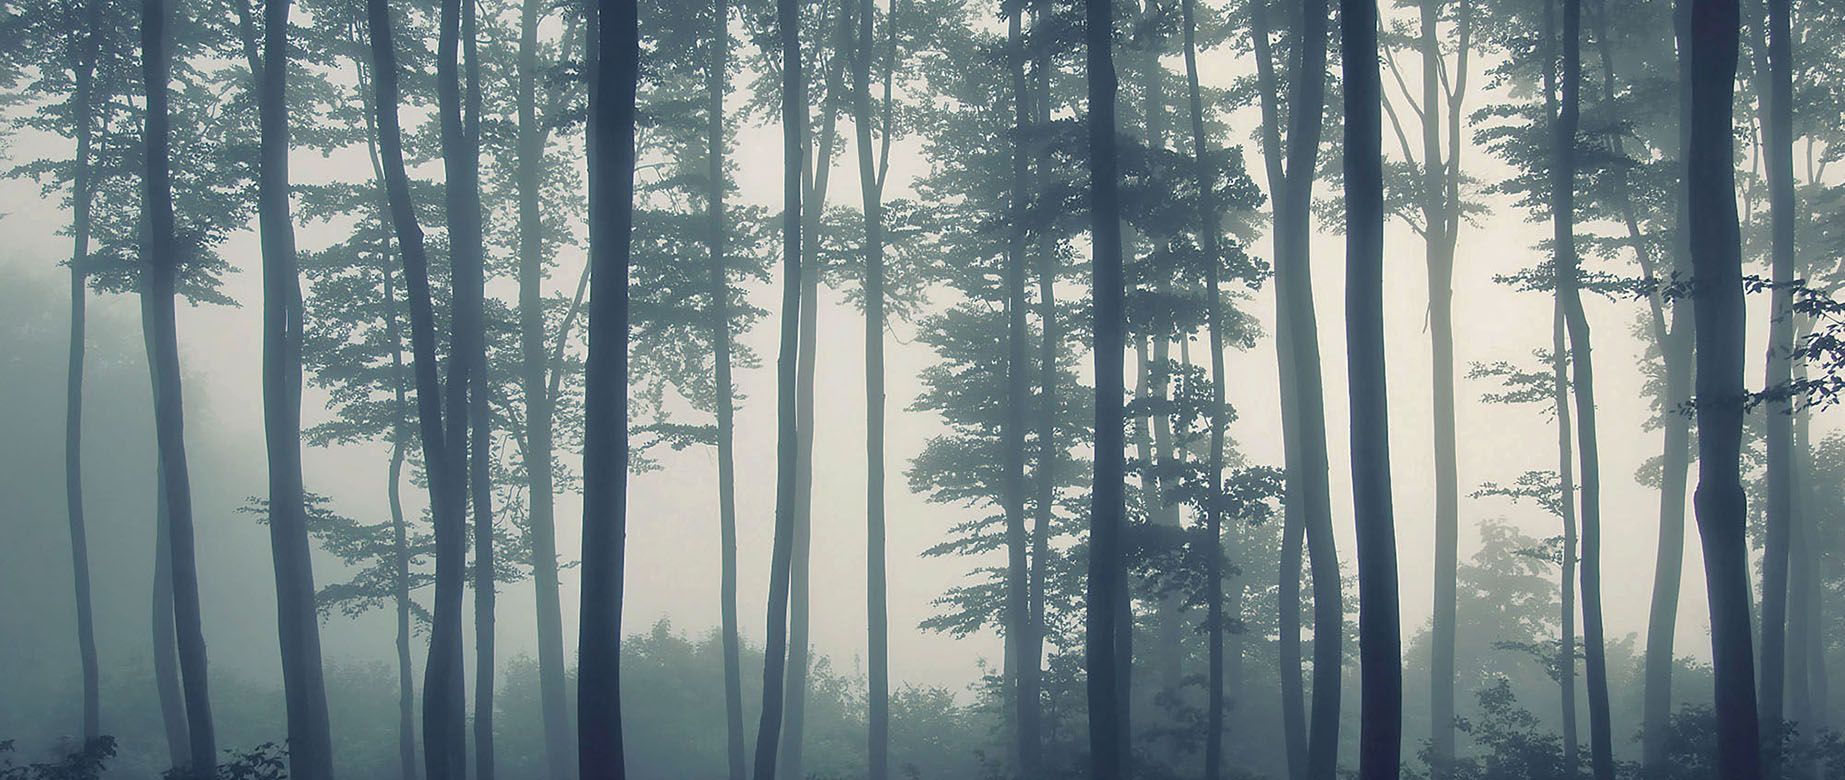 Nature's Beauty: Tropical Foggy Forest Wallpaper Decor